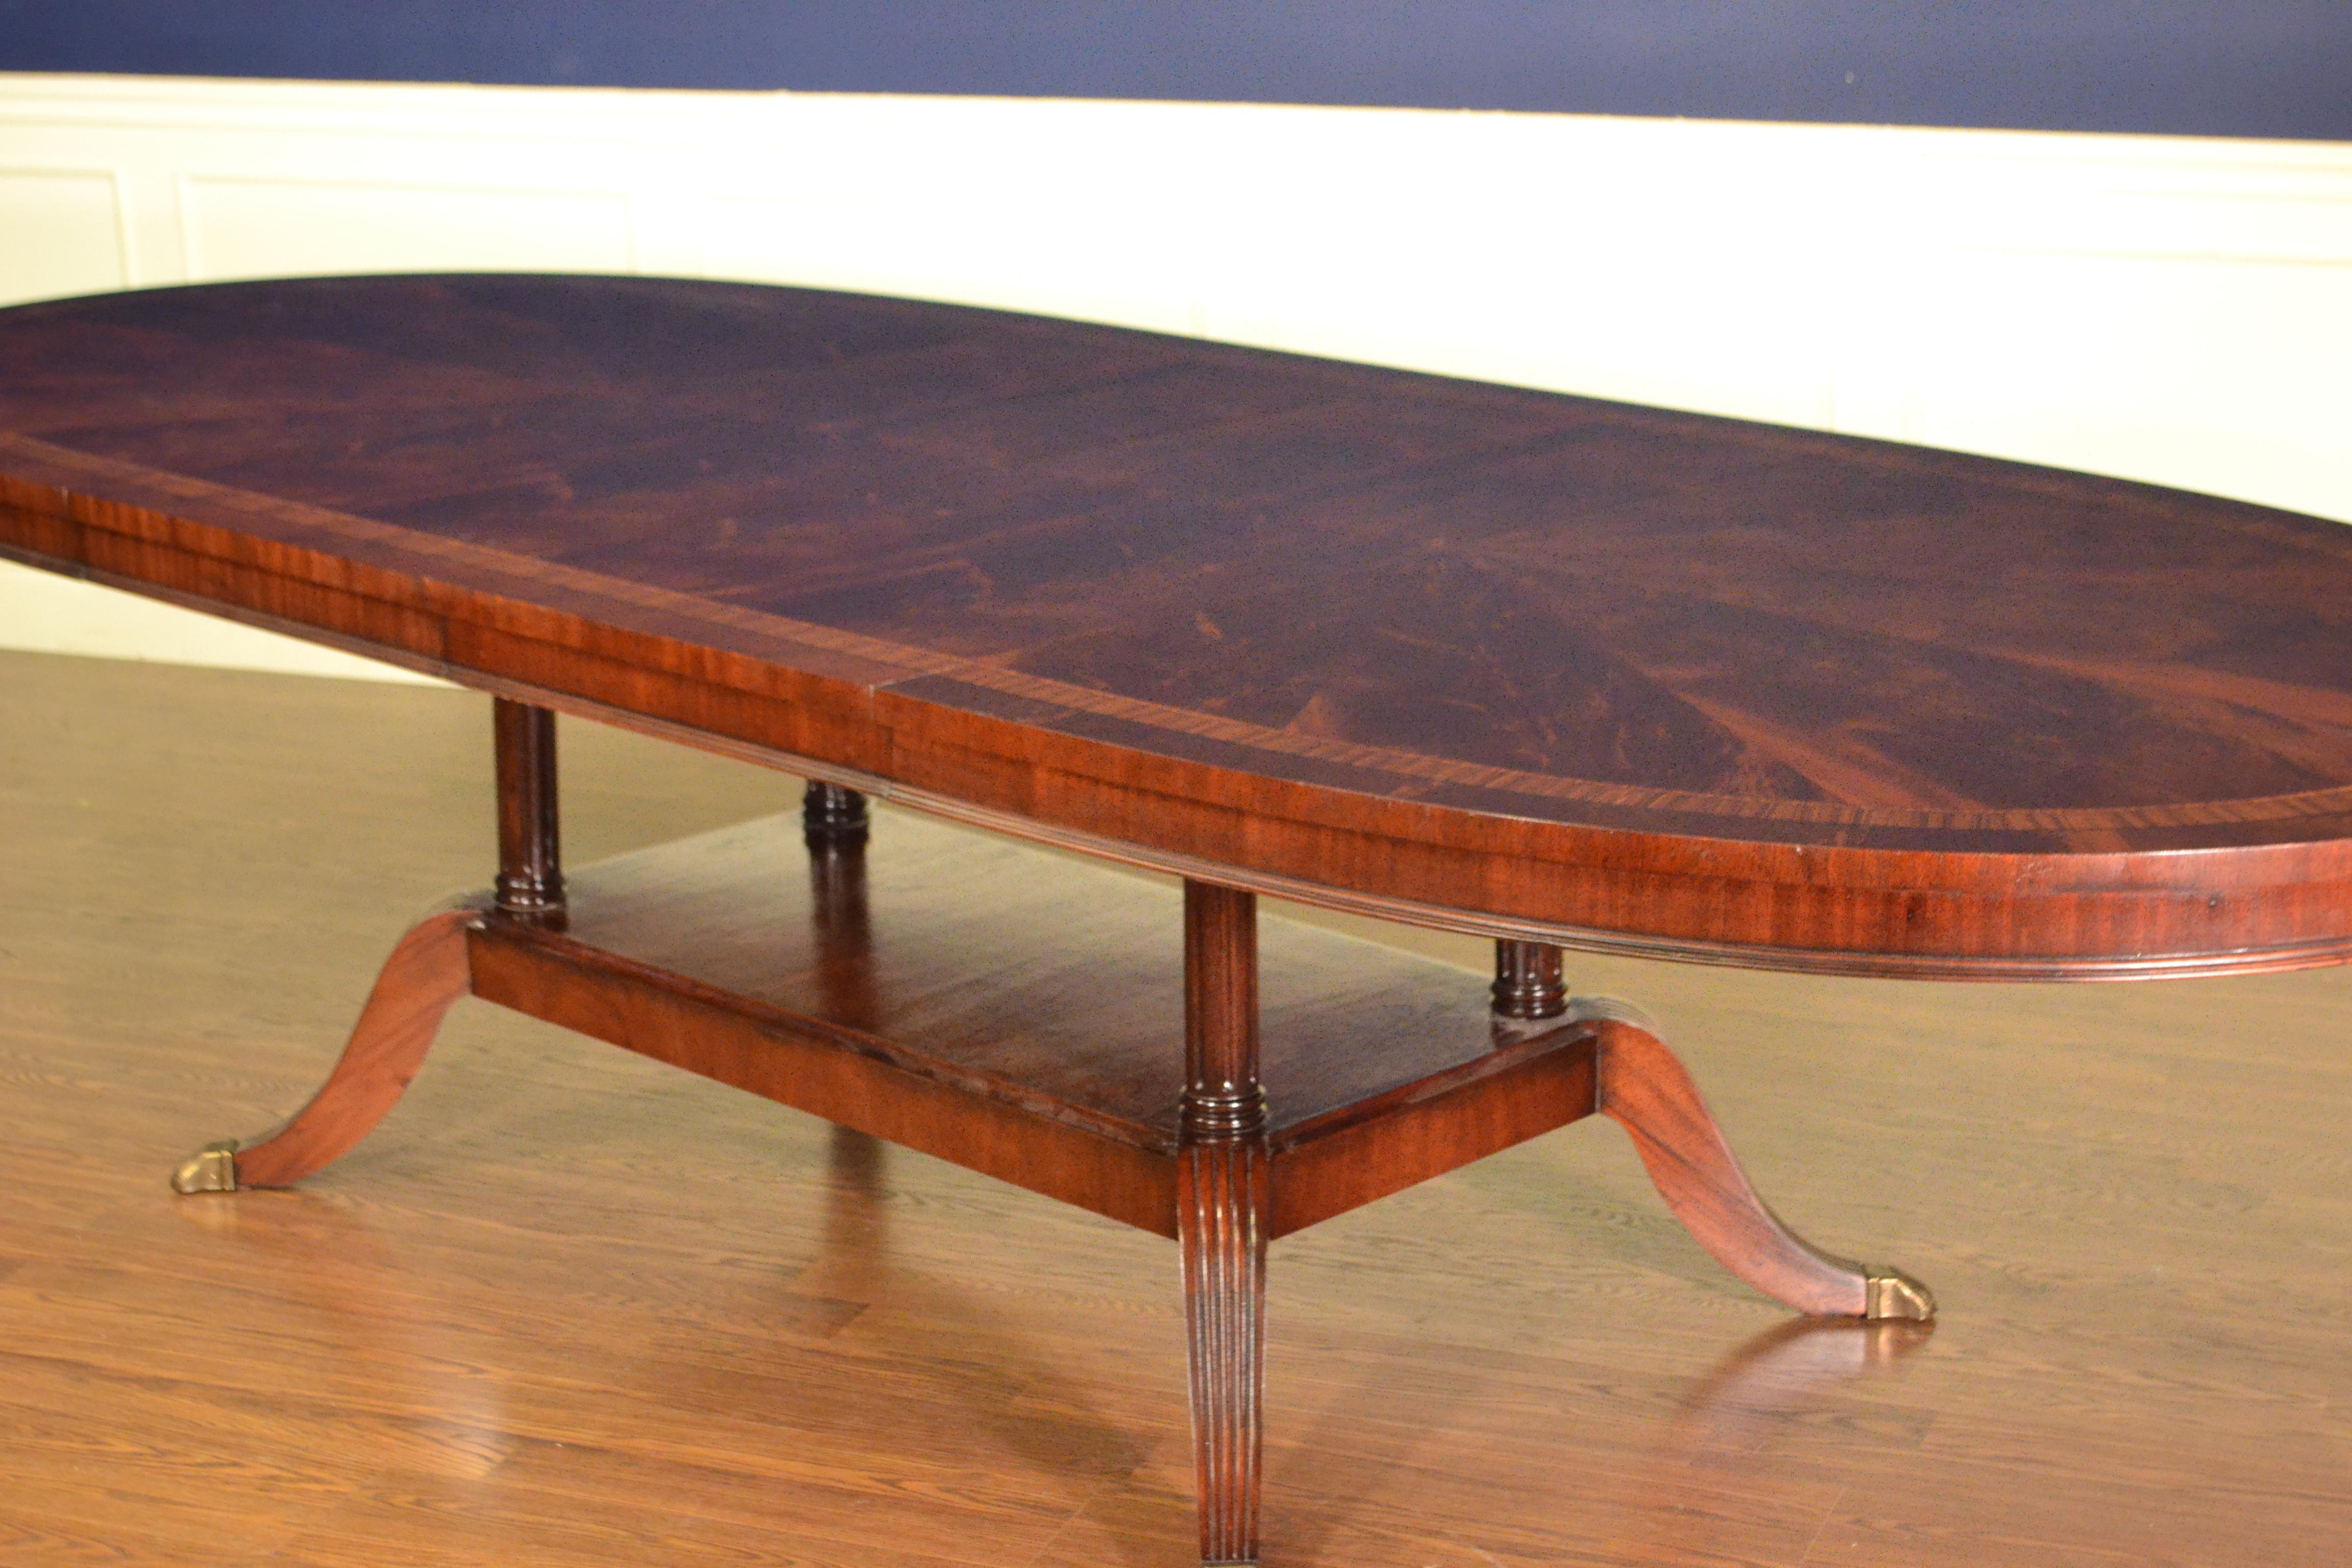 This is made-to-order oval traditional mahogany dining table made in the Leighton Hall shop. It features a radial cut field of west African swirly crotch mahogany and two borders of santos rosewood and crotch mahogany. The top has a hand rubbed and